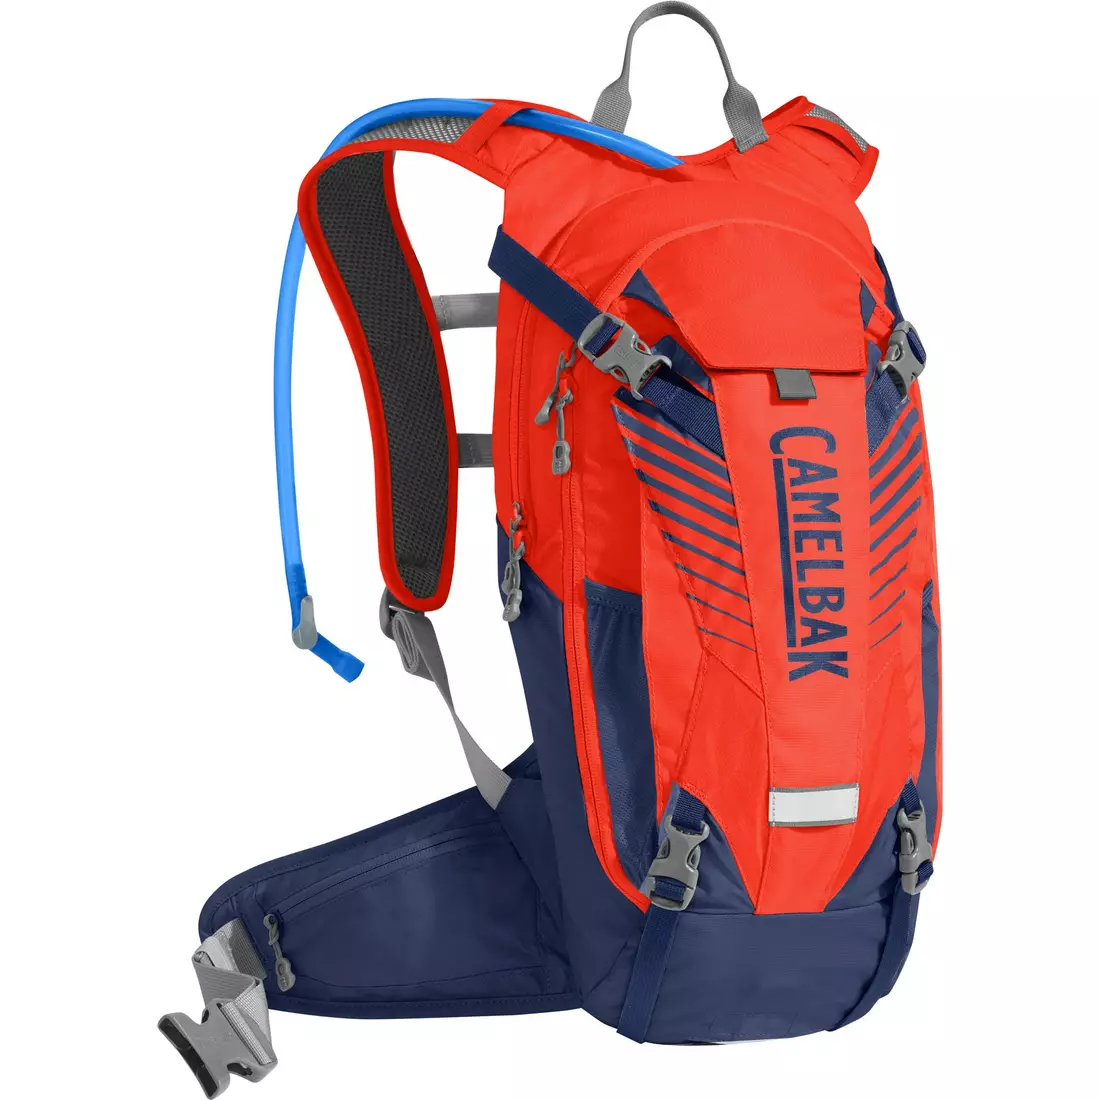 Camelbak SS18 bicycle backpack KUDU 8 DRY Cherry Tomato/Pitch Blue 1359601900